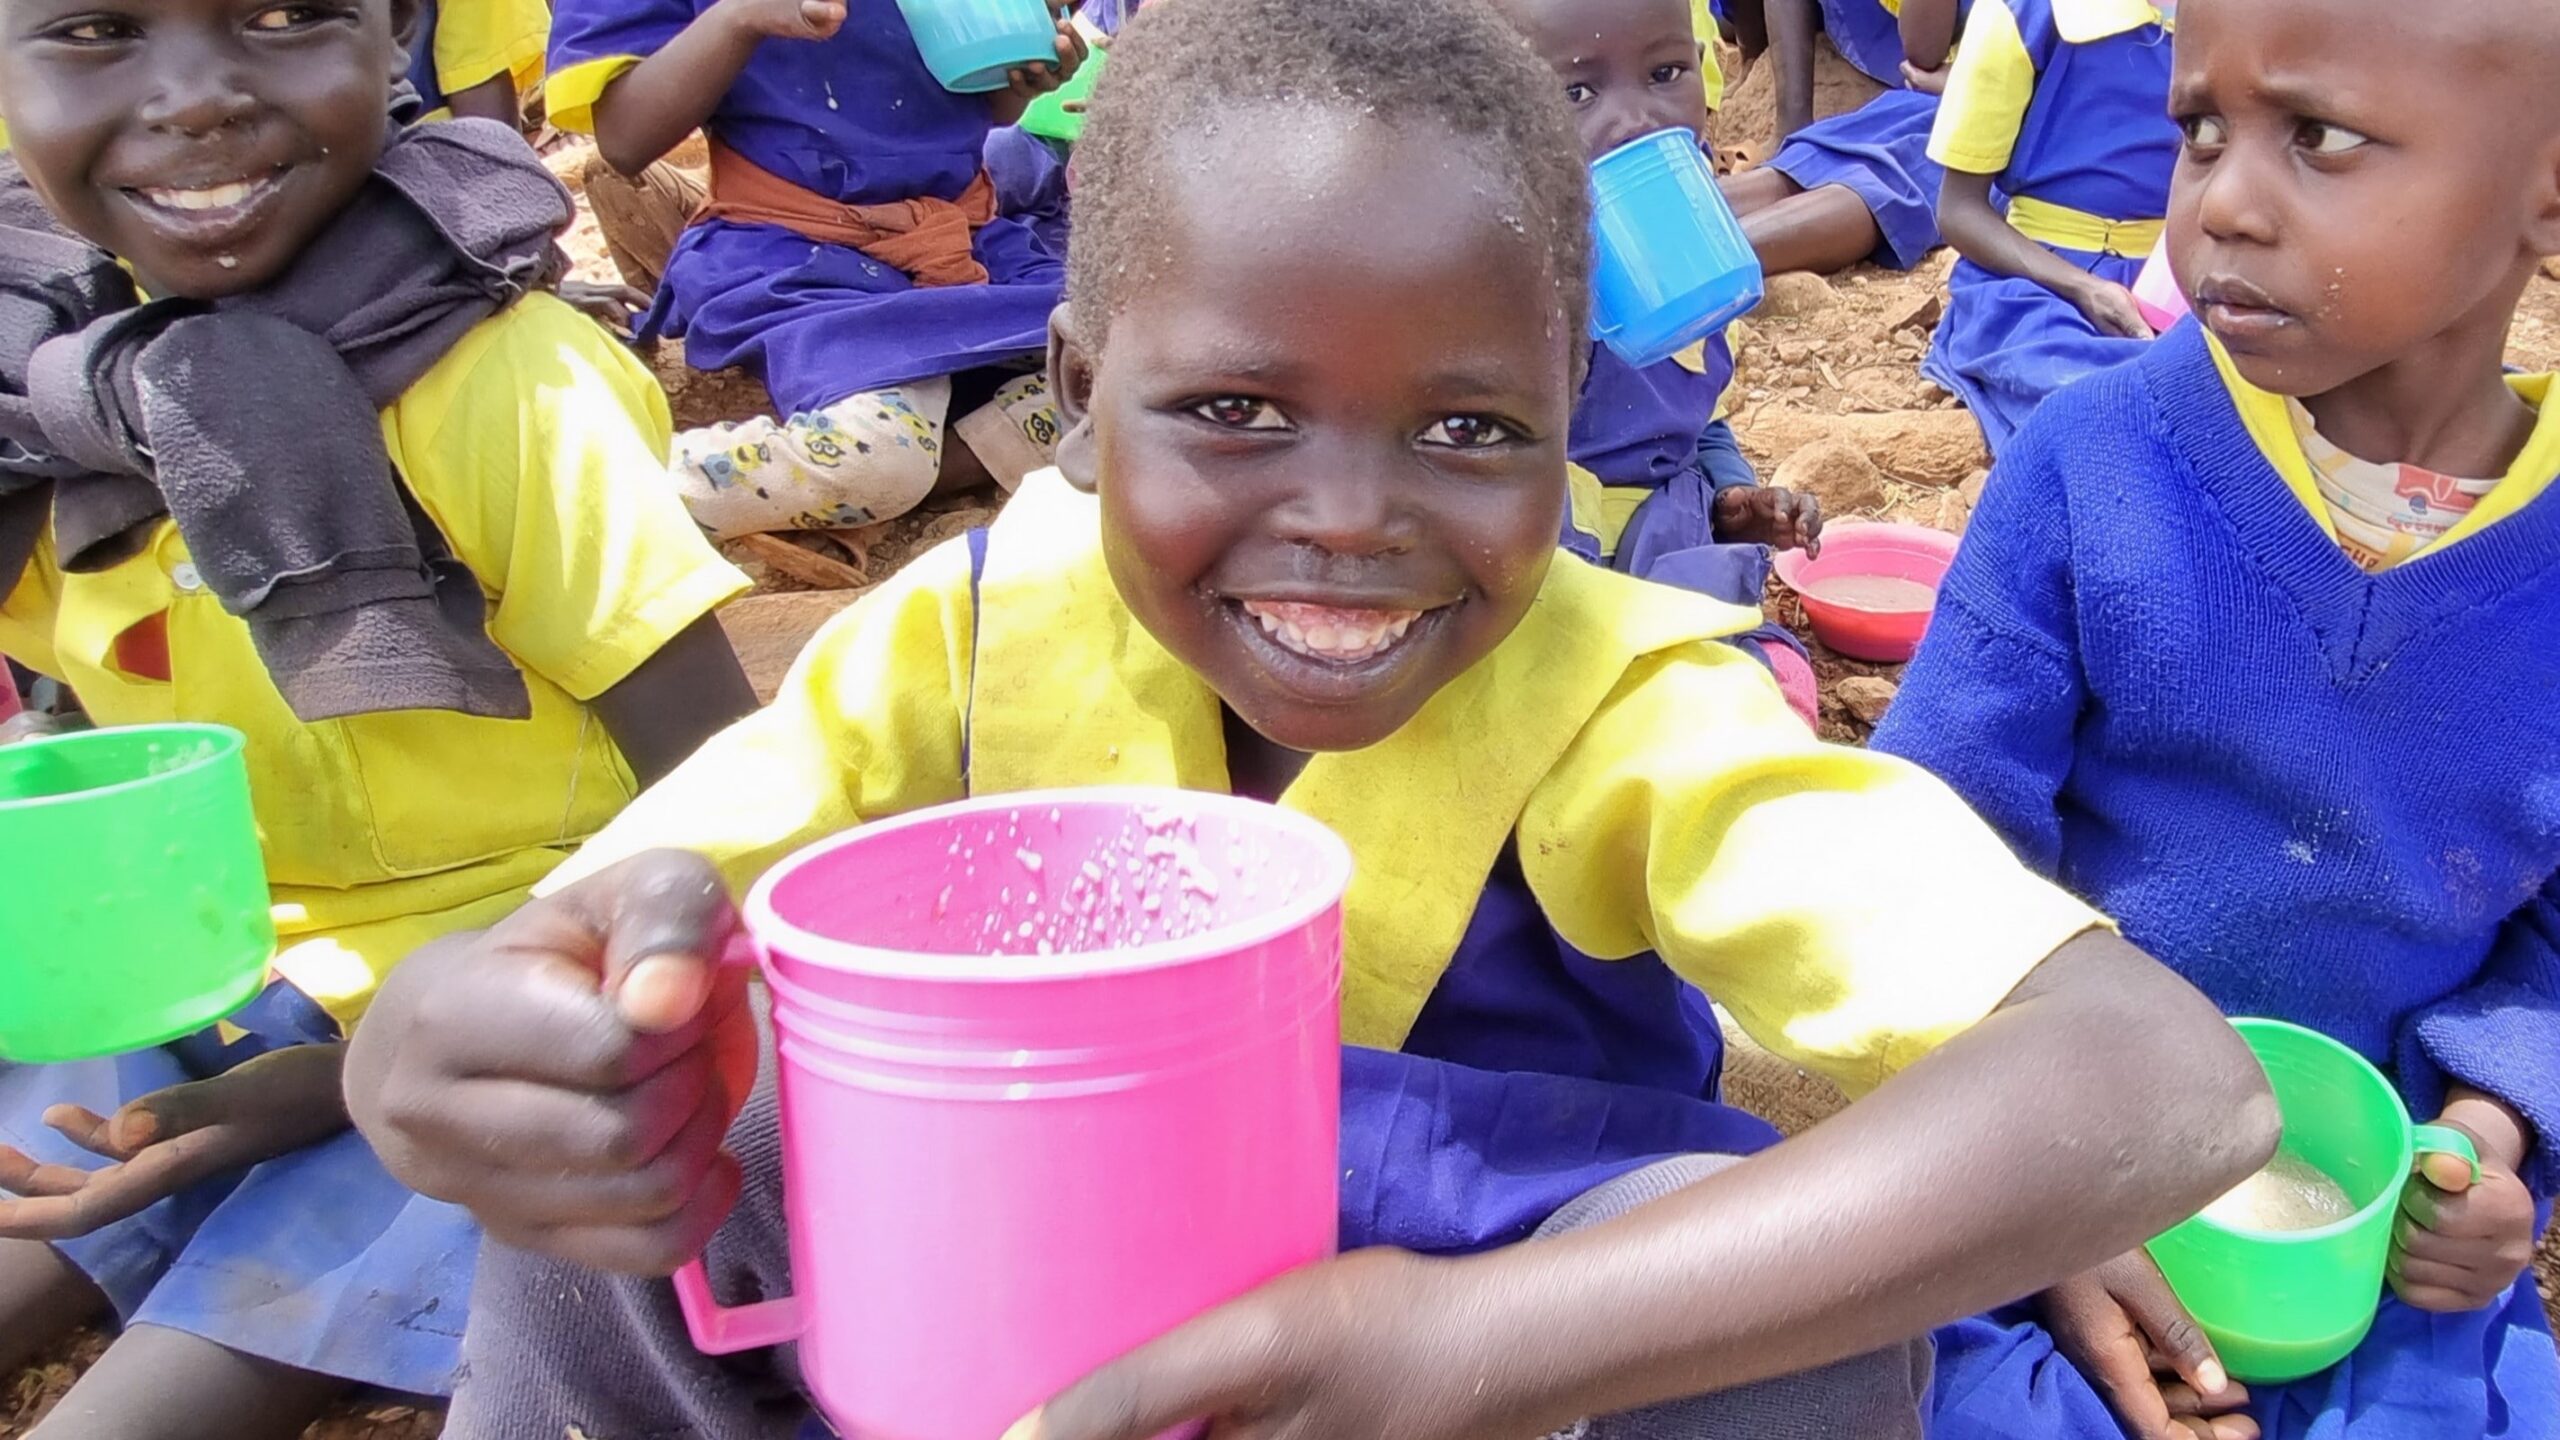 A young child holds a pink mug